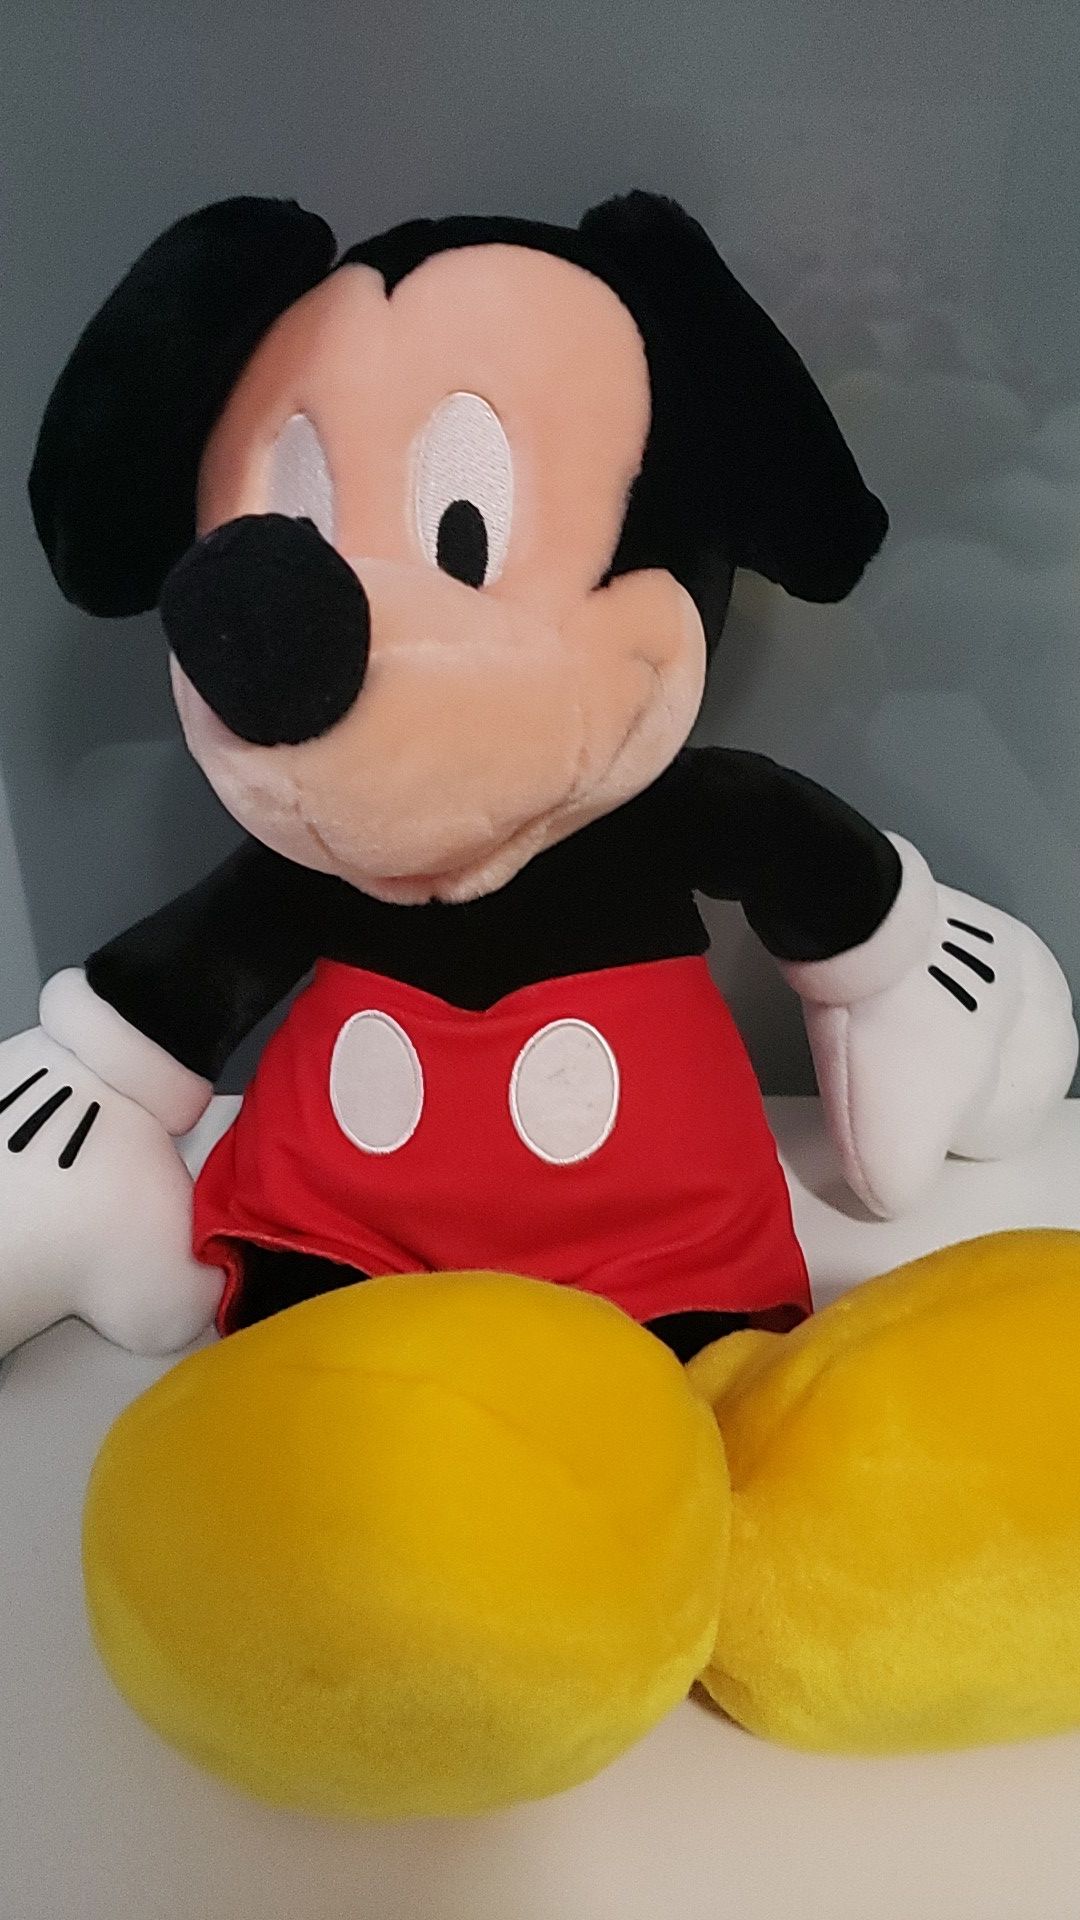 Micky and Minnie plushie